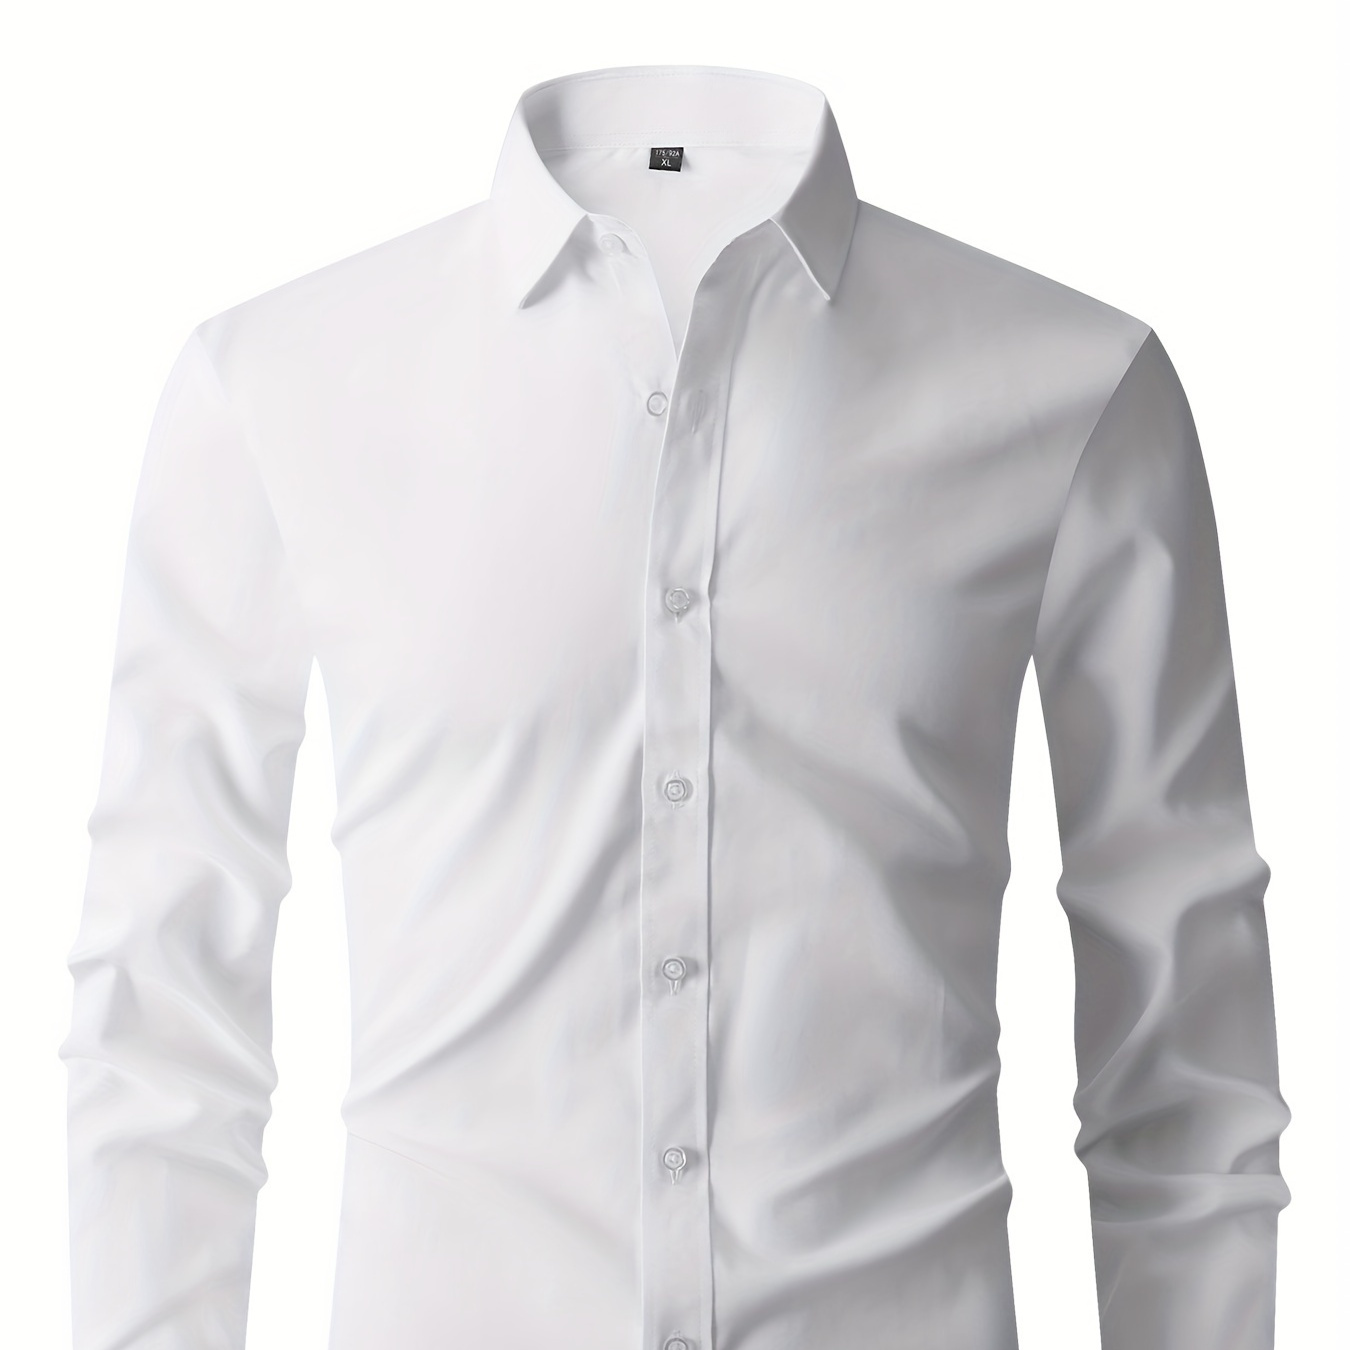 

Men's Lapel Collar Design Solid Cotton Dress Shirts, Long Sleeve Casual Button Up Shirt For Formal Occasions, Spring And Fall